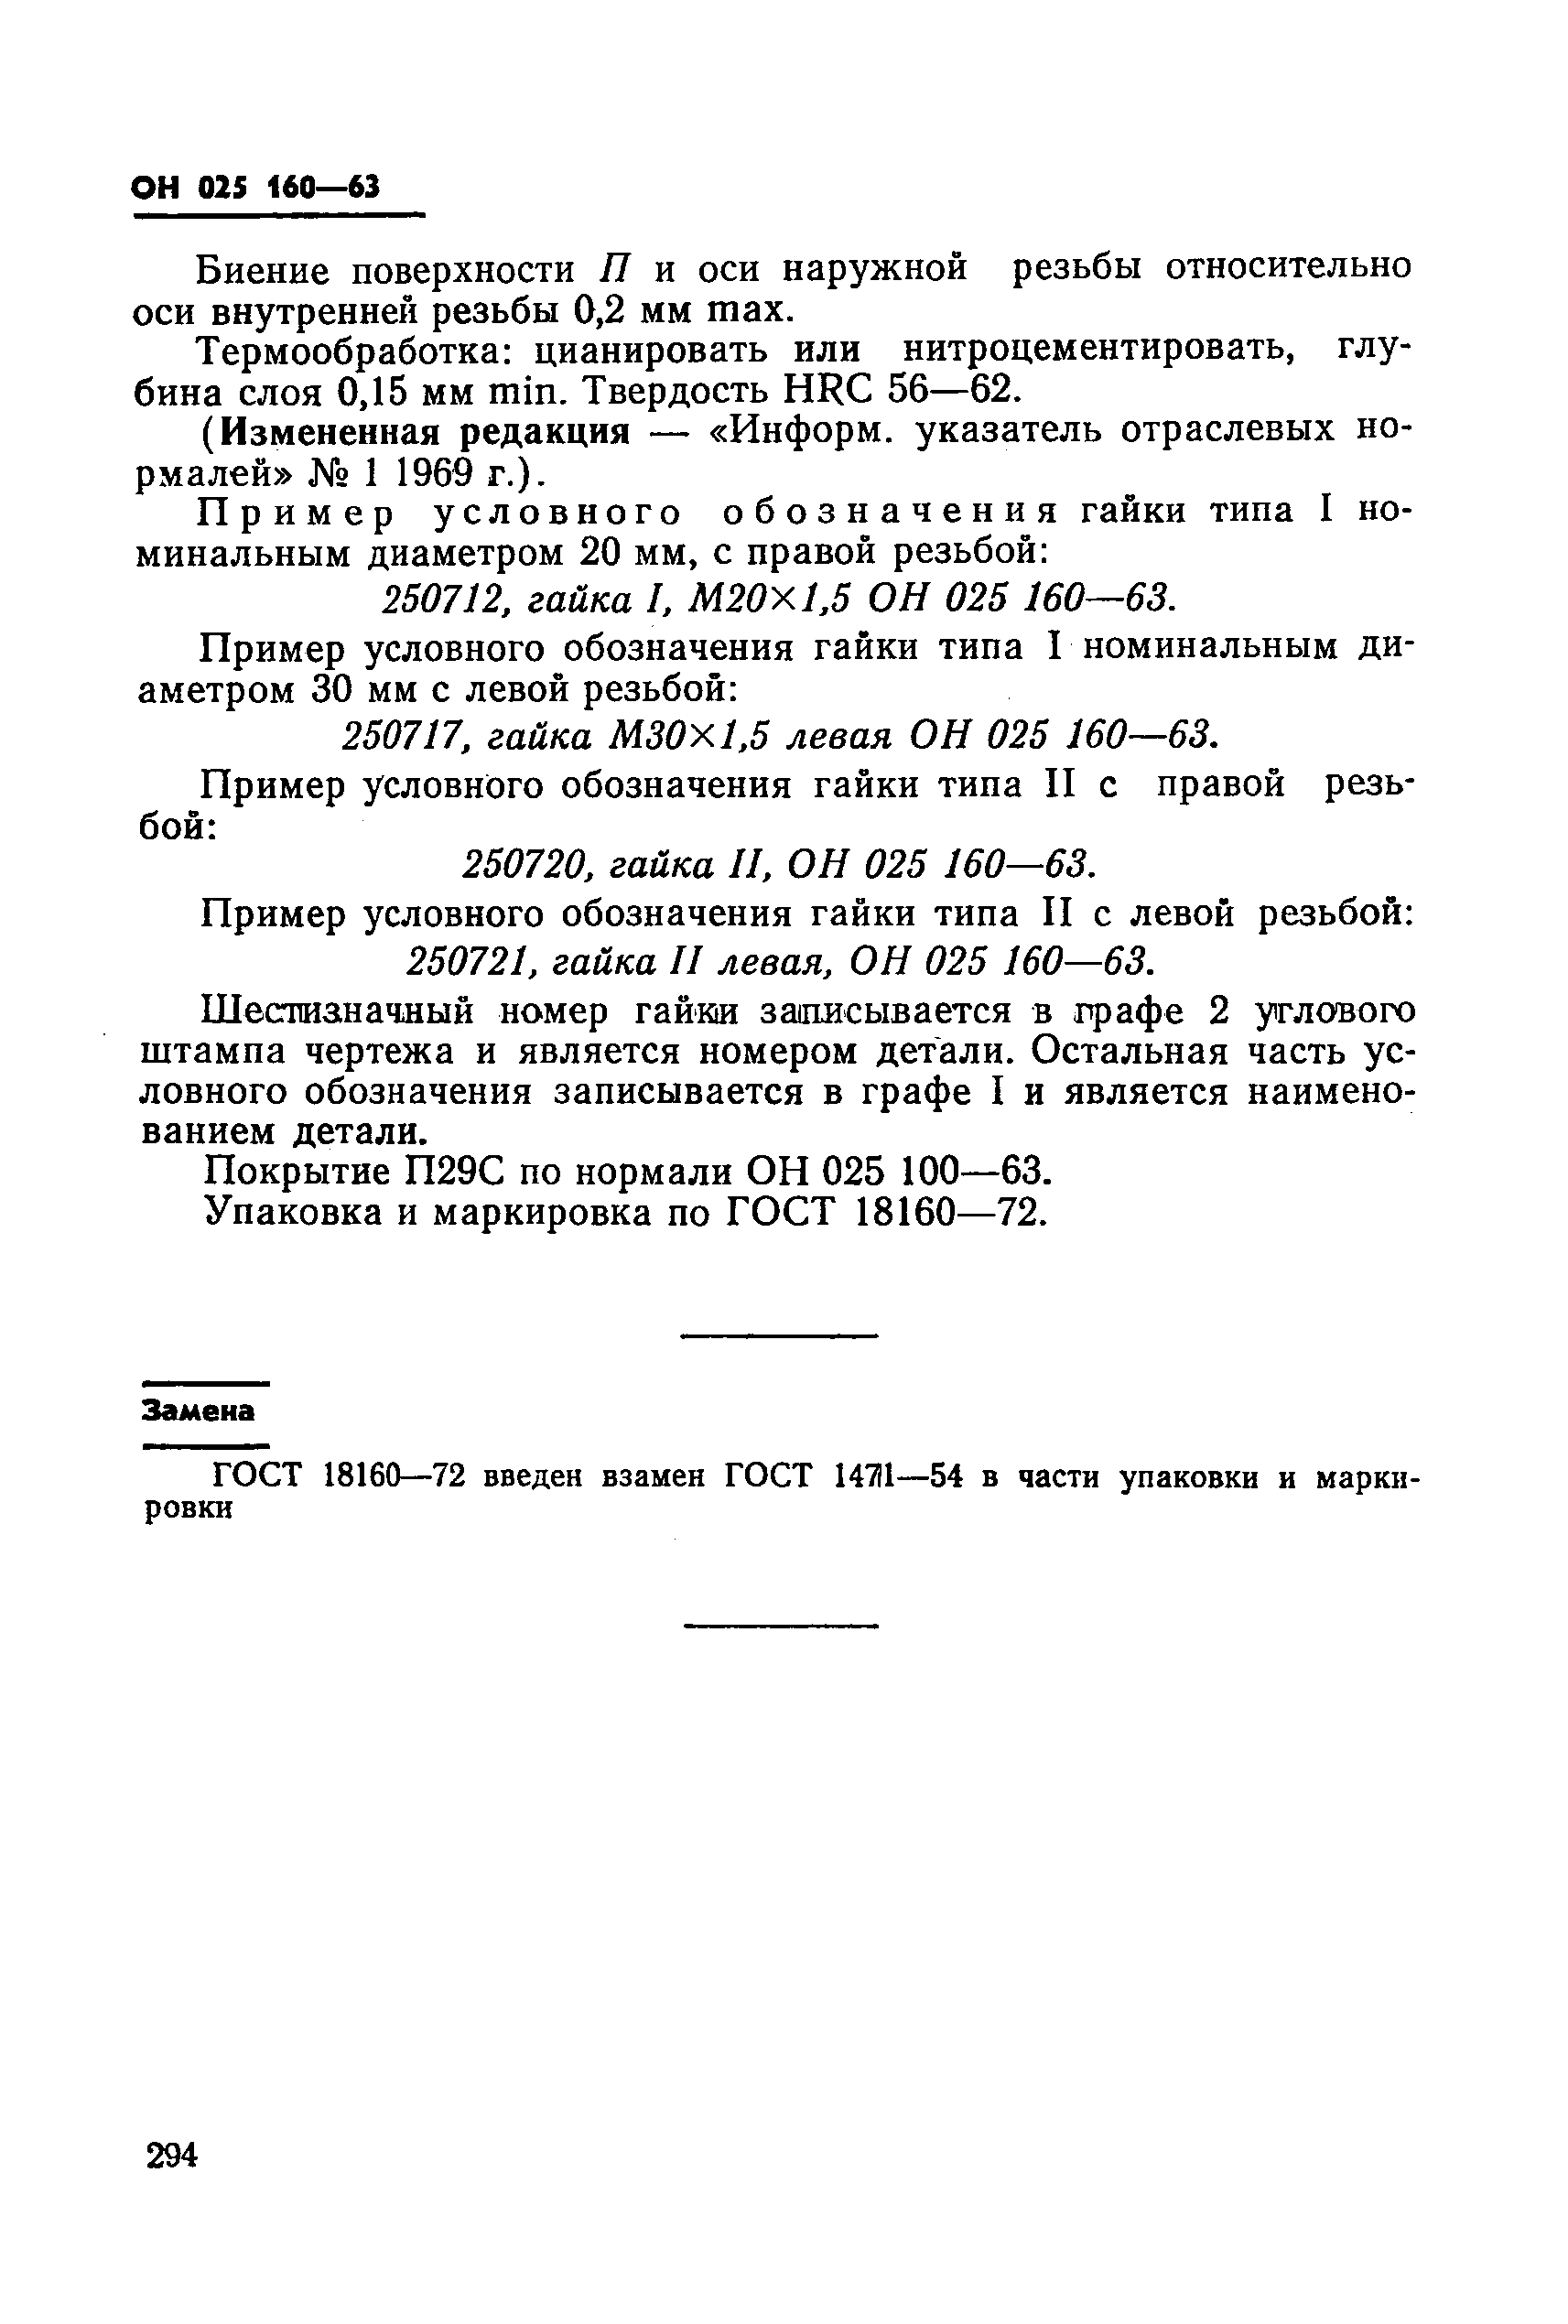 ОН 025 160-63